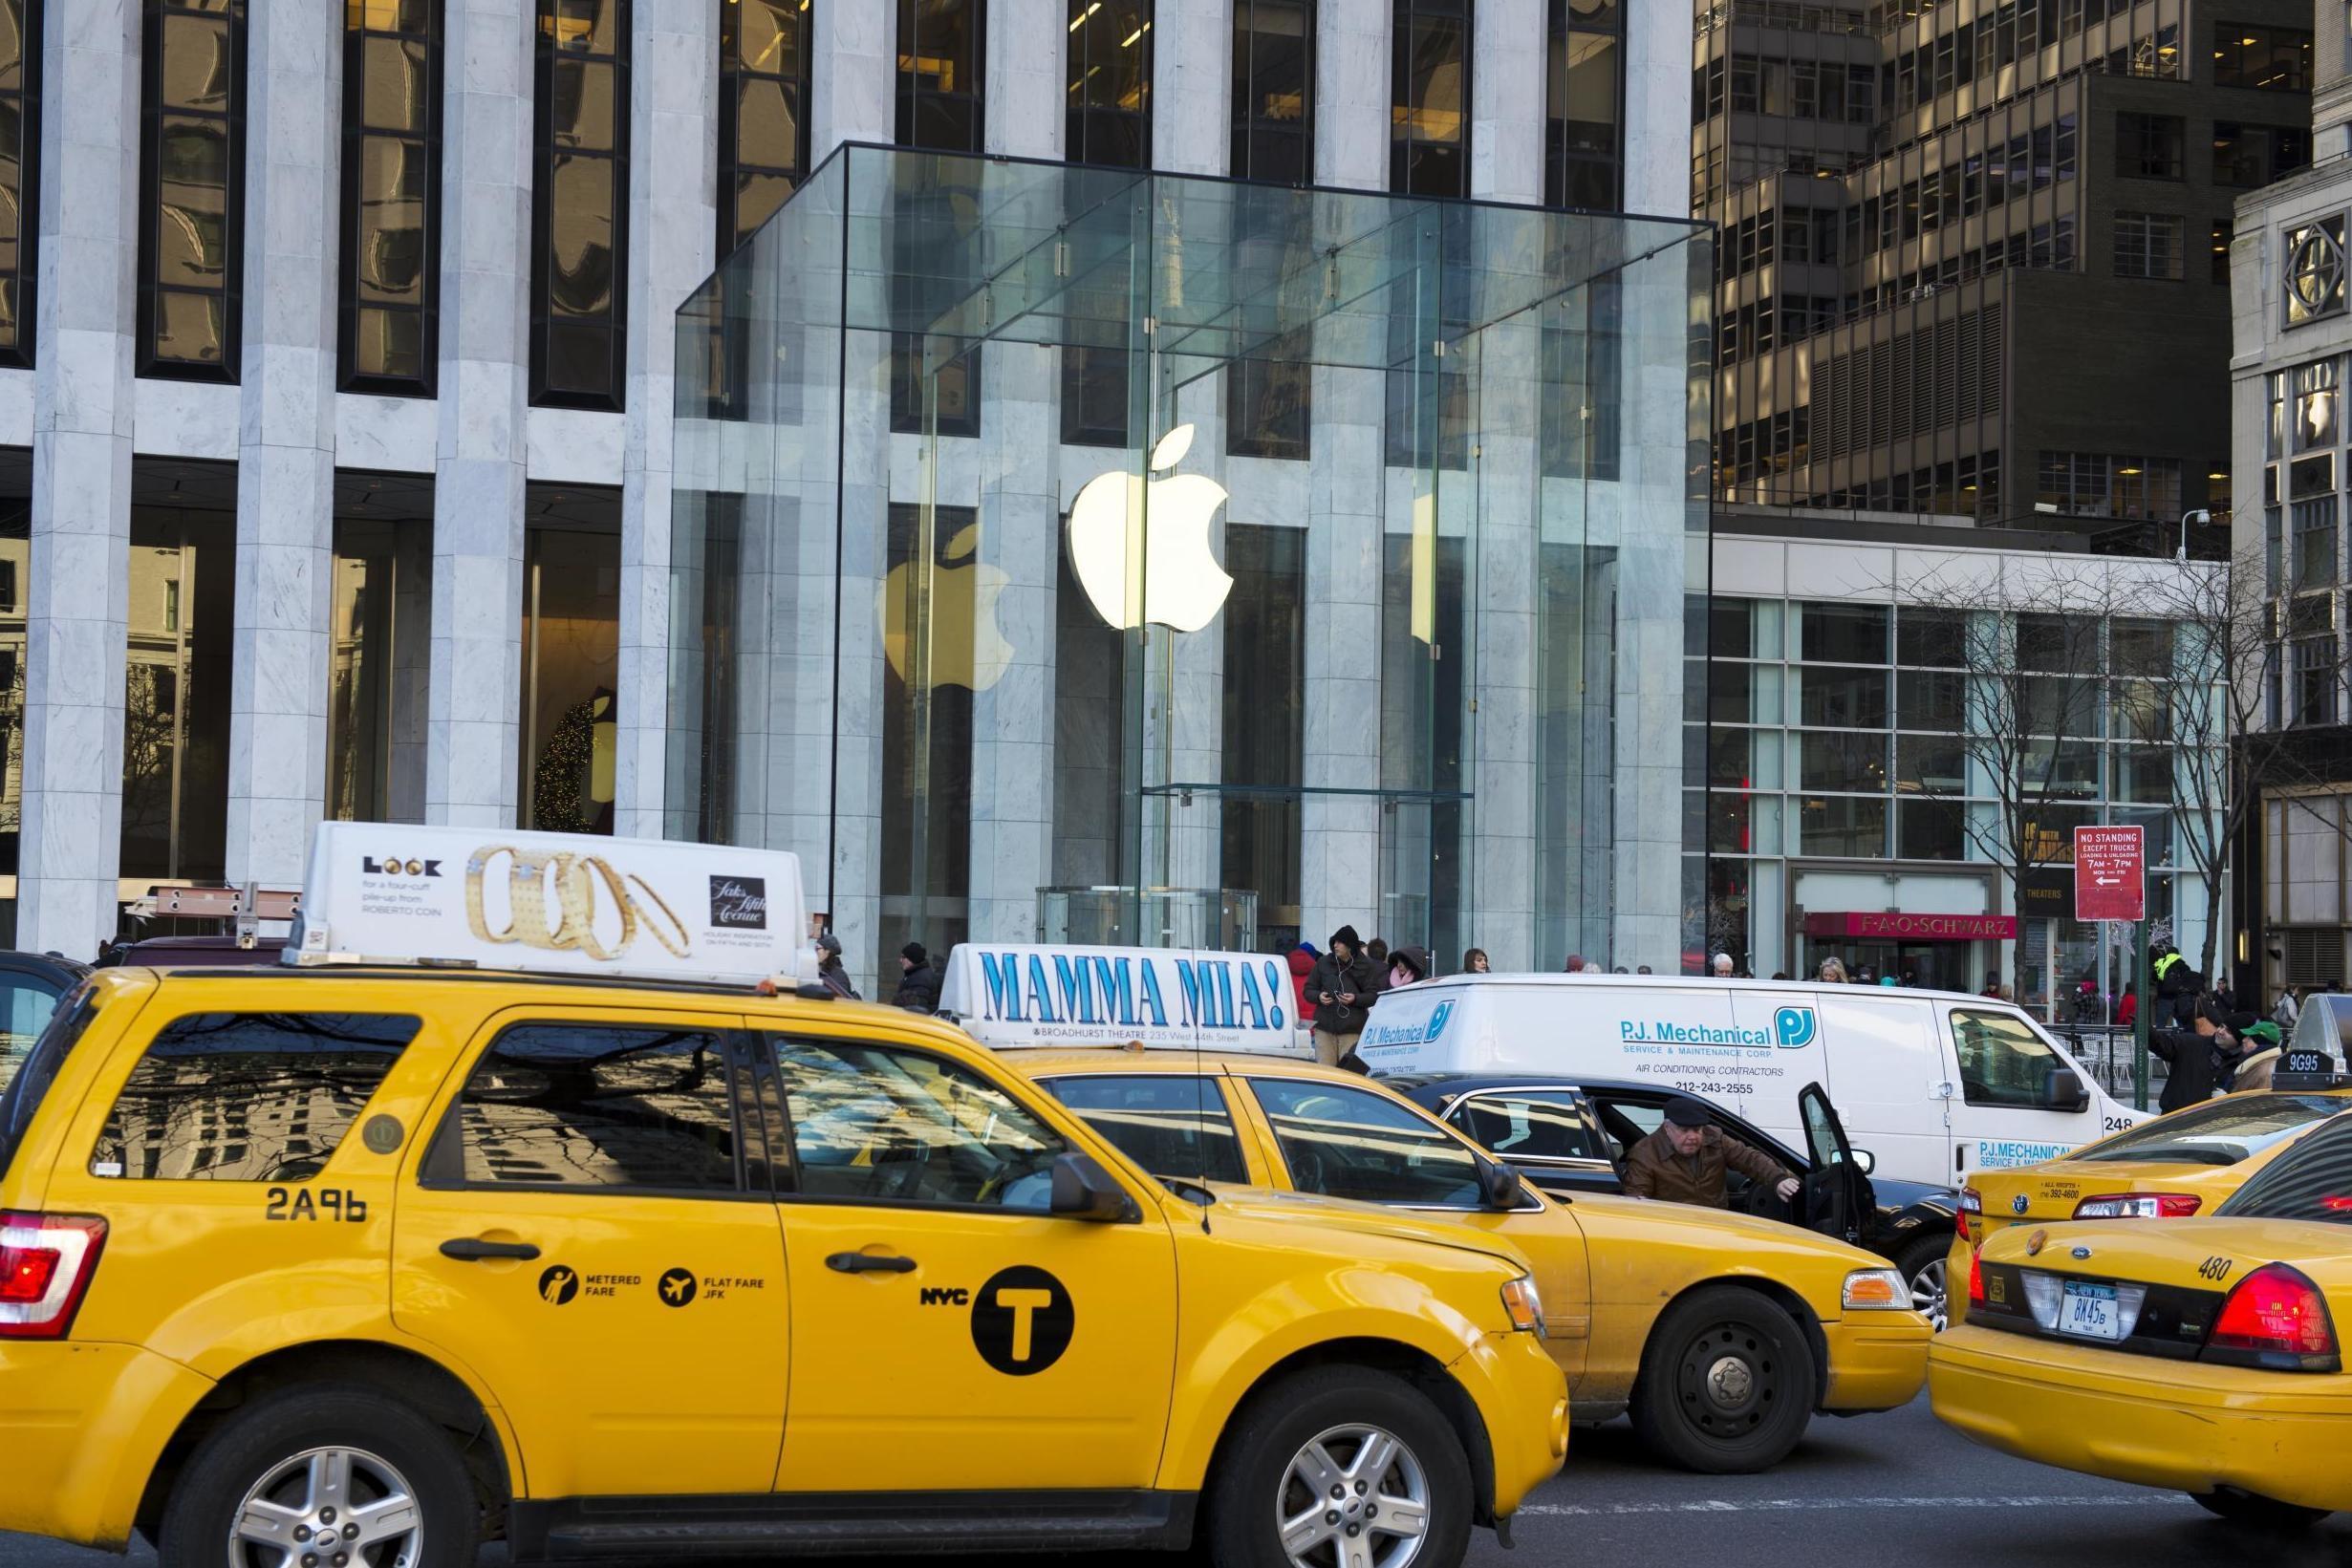 Apple's 5th Avenue location reportedly has bed bugs (Stock)